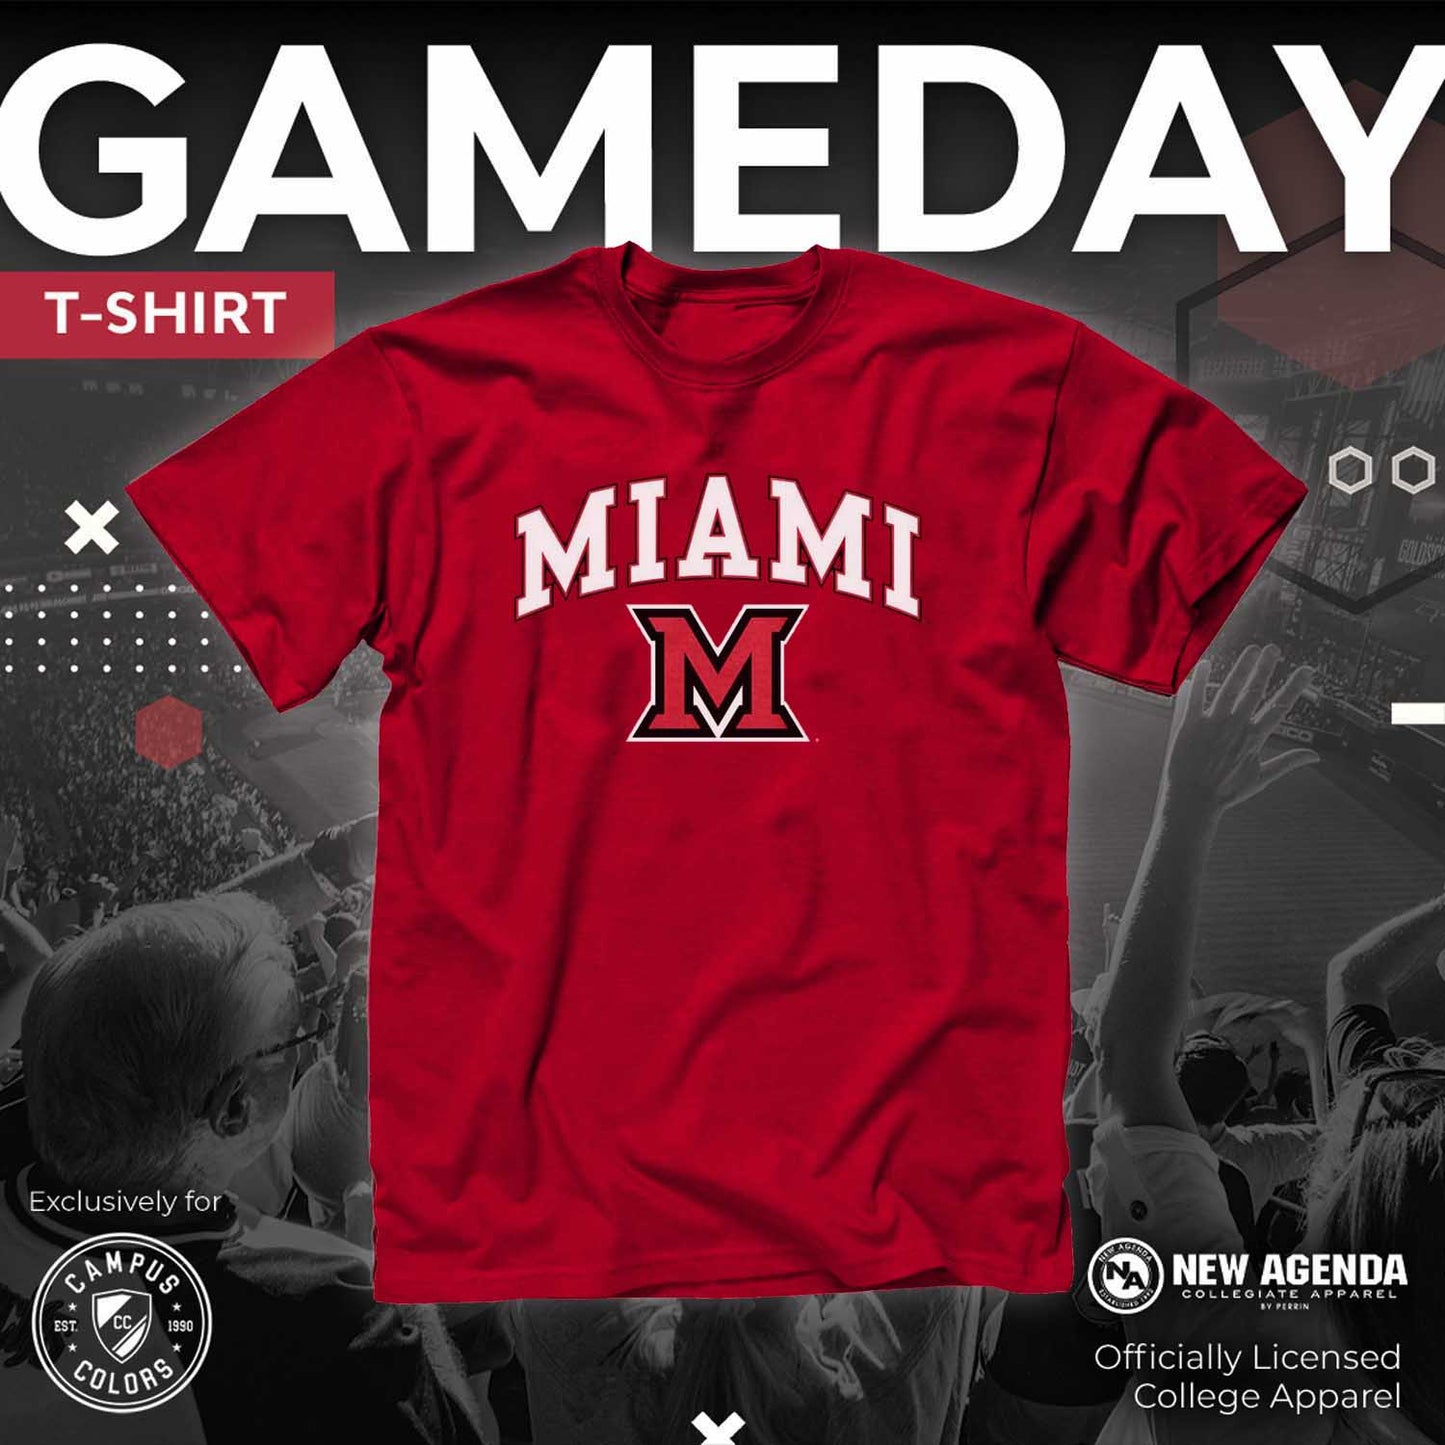 Miami Redhawks NCAA Adult Gameday Cotton T-Shirt - Red